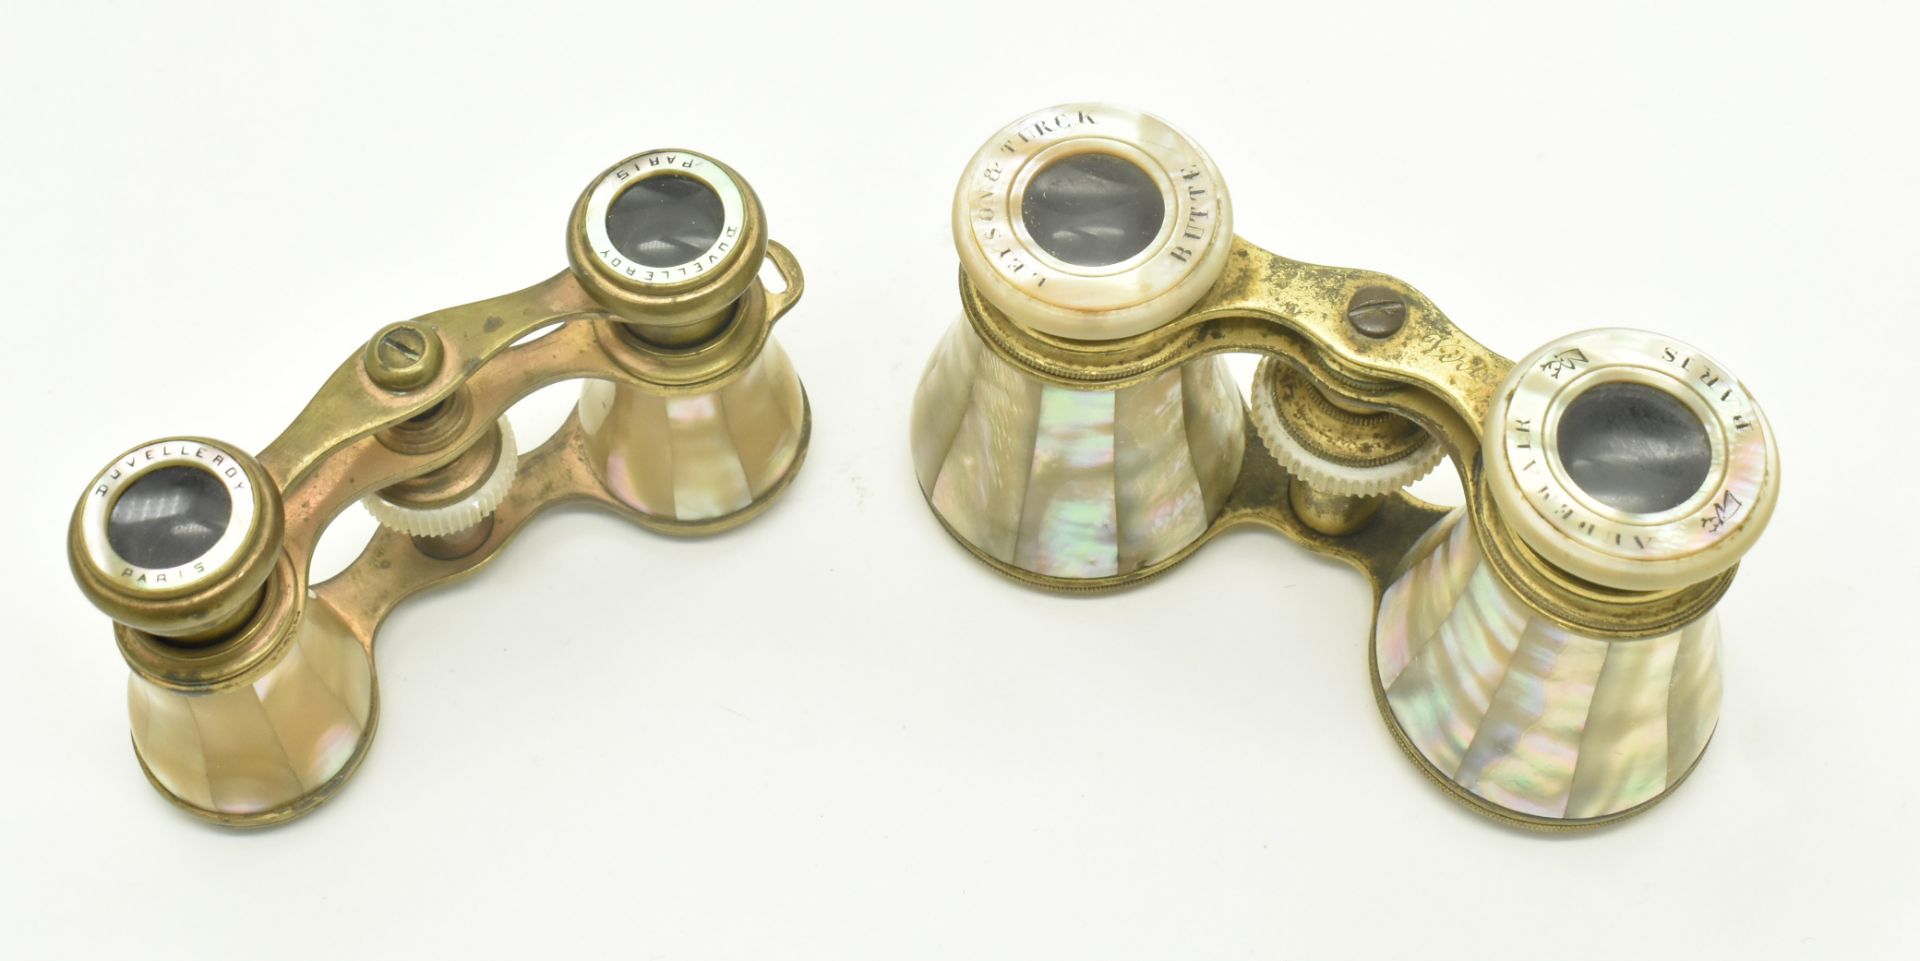 TWO PAIRS OF FRENCH MOTHER OF PEARL OPERA GLASSES - Image 3 of 7